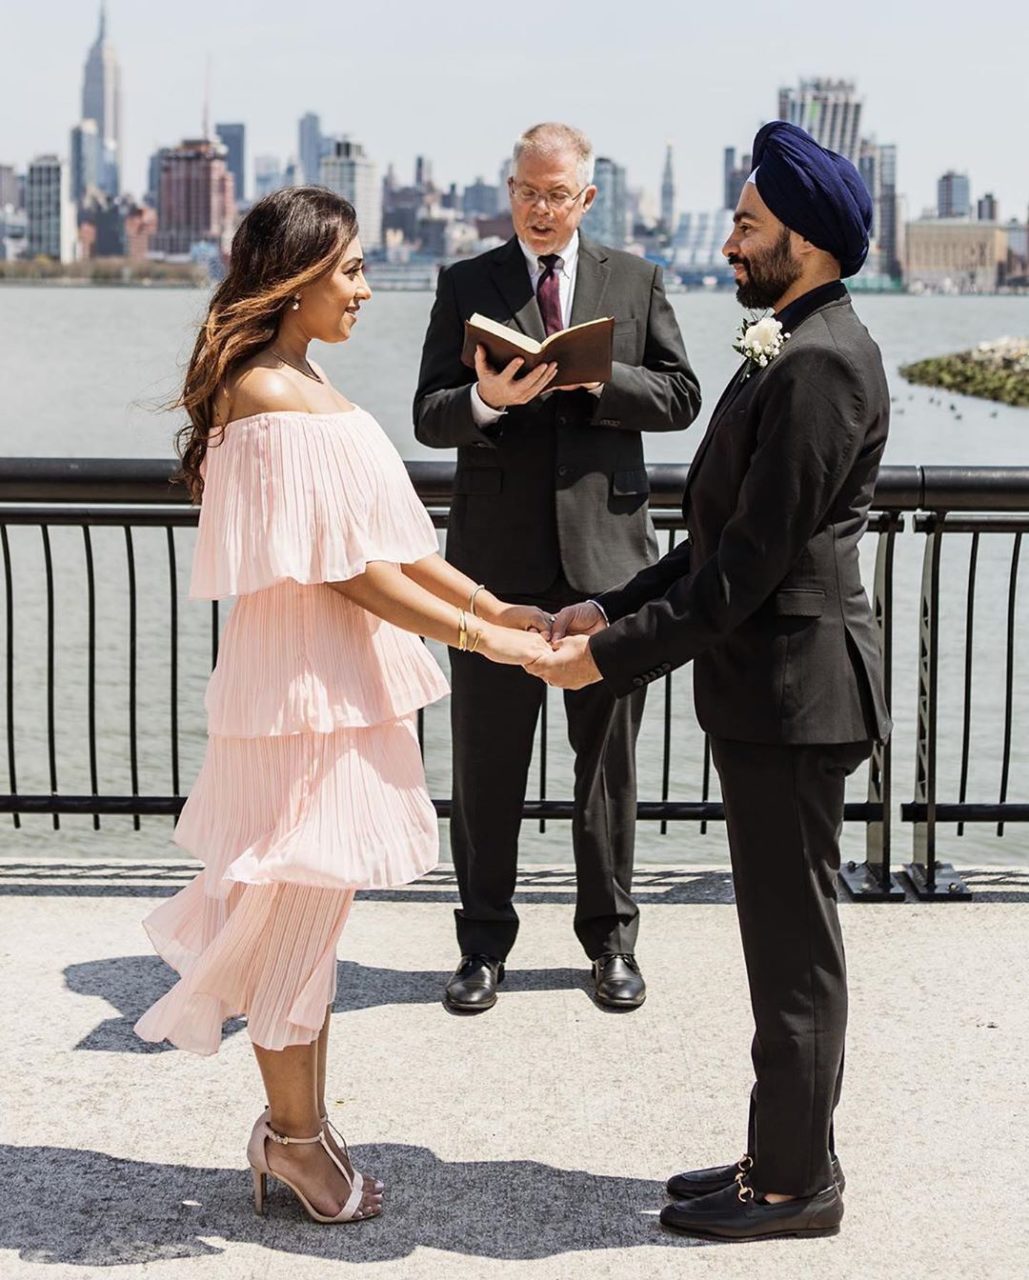 sikh couple getting married by the city skyline